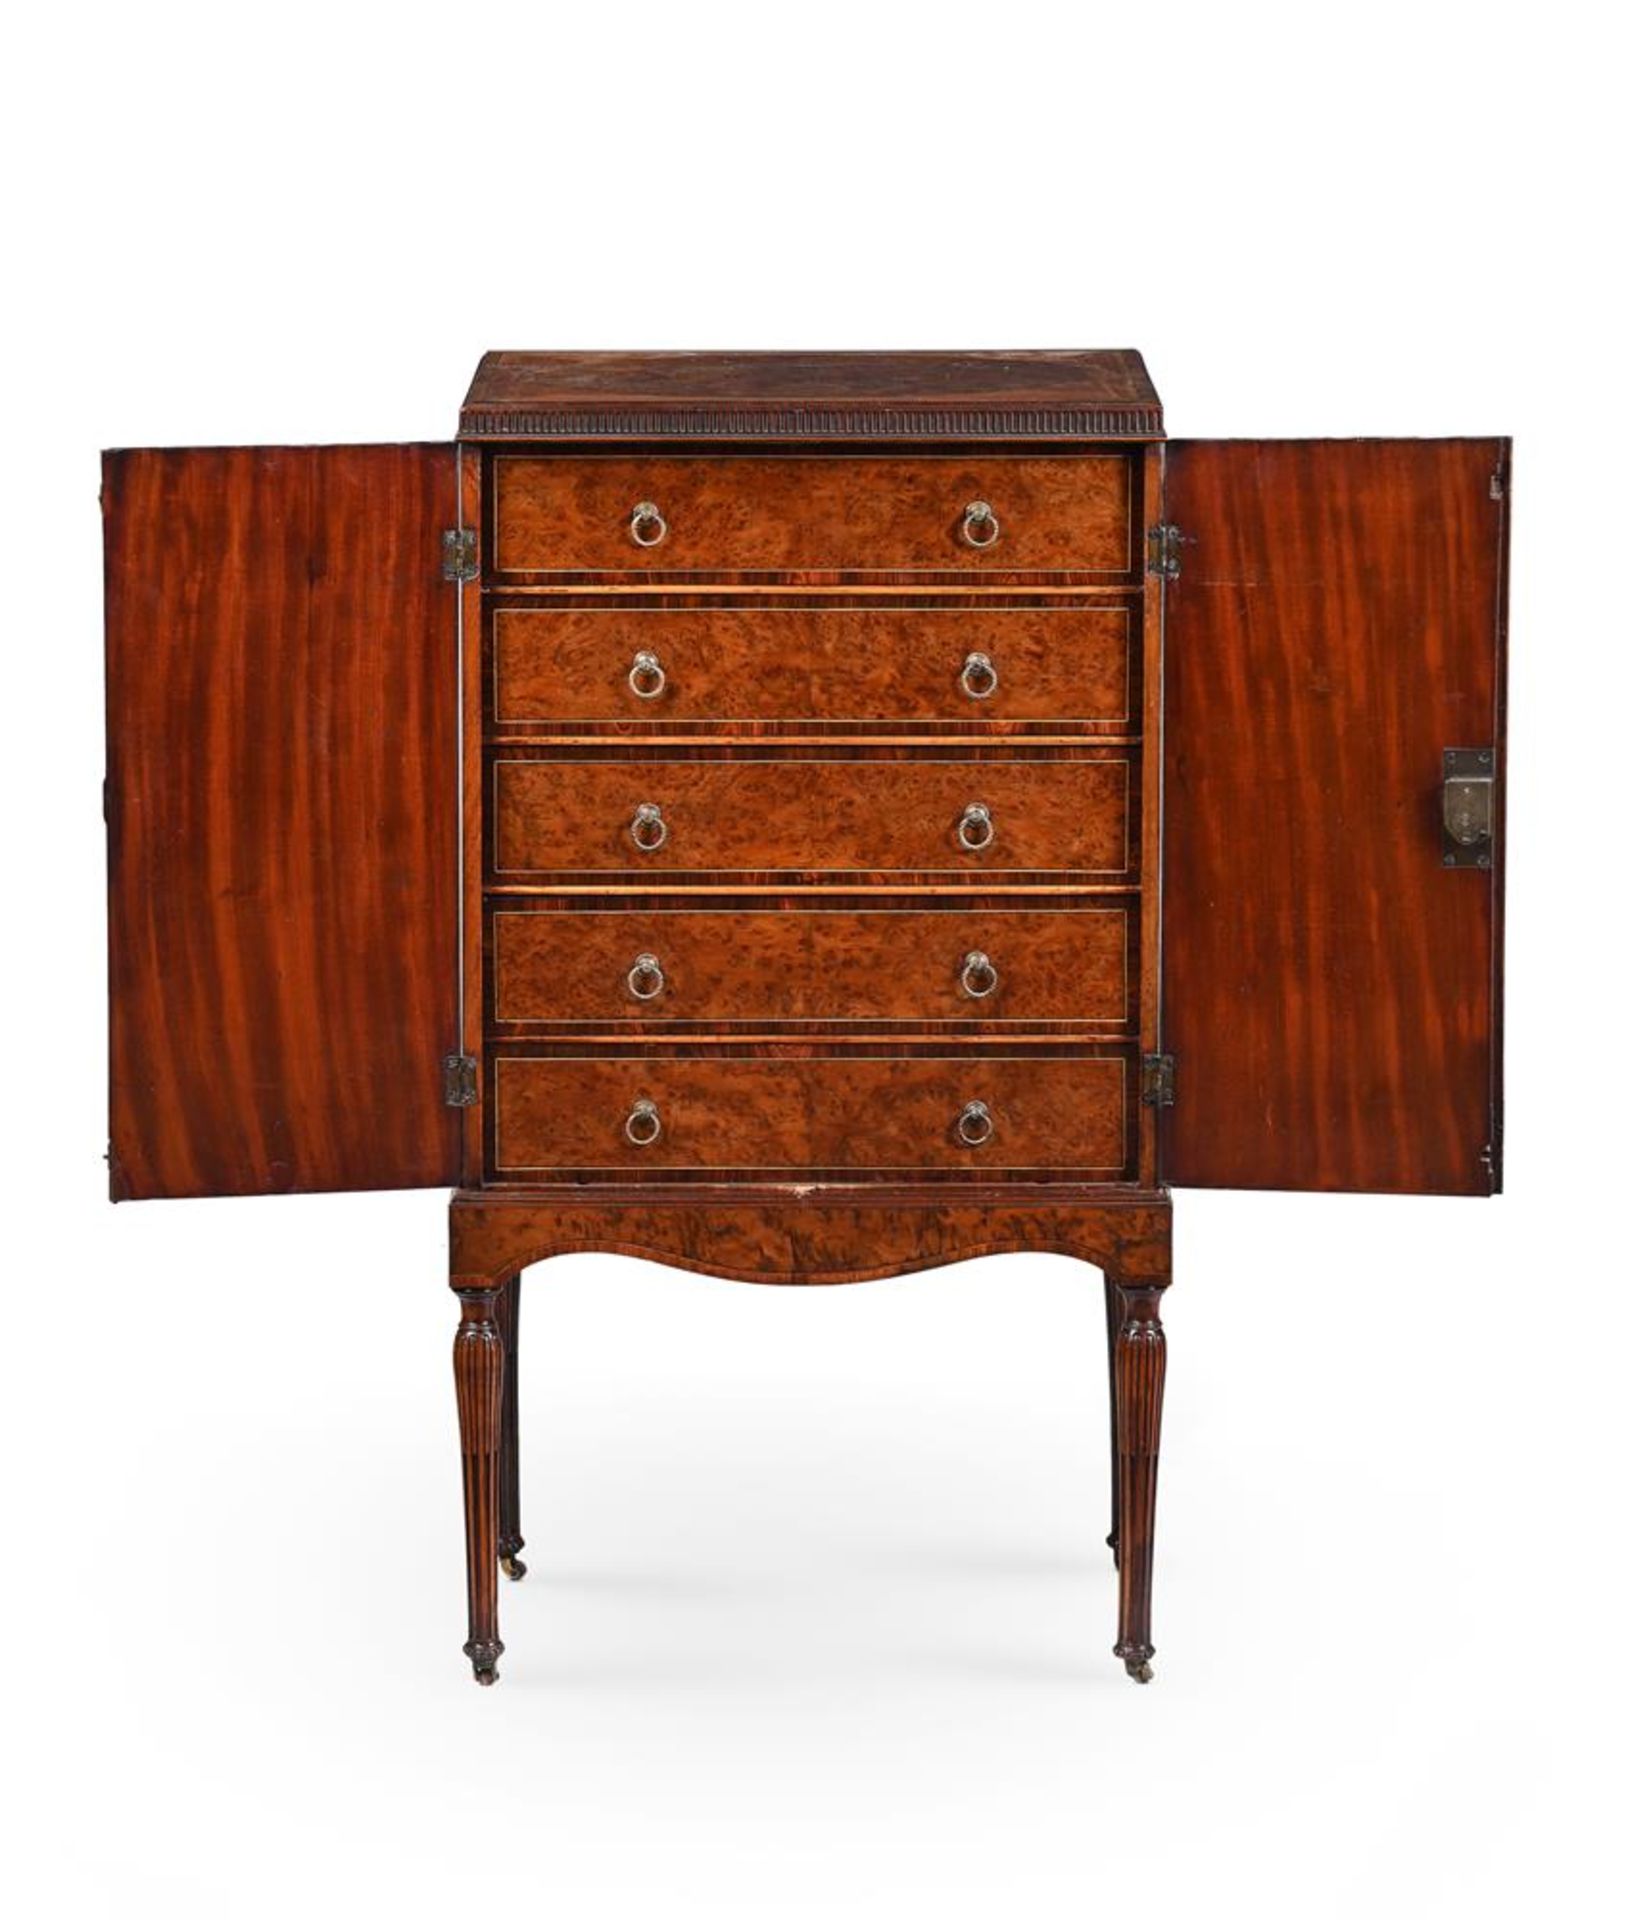 Y A GEORGE III SATINWOOD, BURR YEW AND TULIPWOOD CROSSBANDED COLLECTOR'S CABINET ON STAND, CIRCA 181 - Image 3 of 4